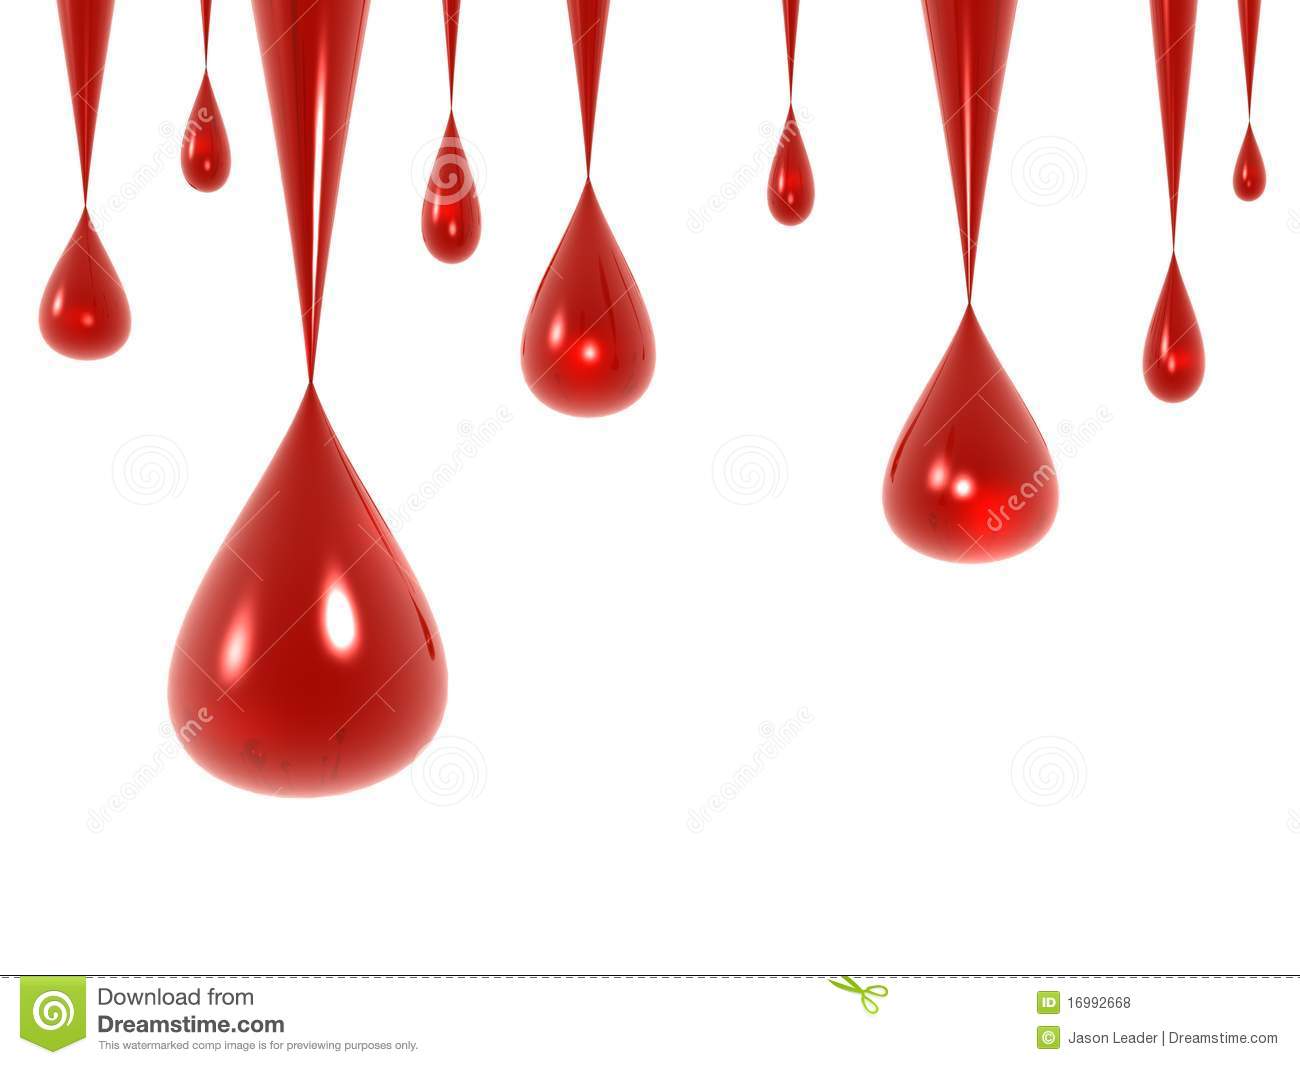 Blood Droplet Royalty Free Stock Photos   Image  16992668